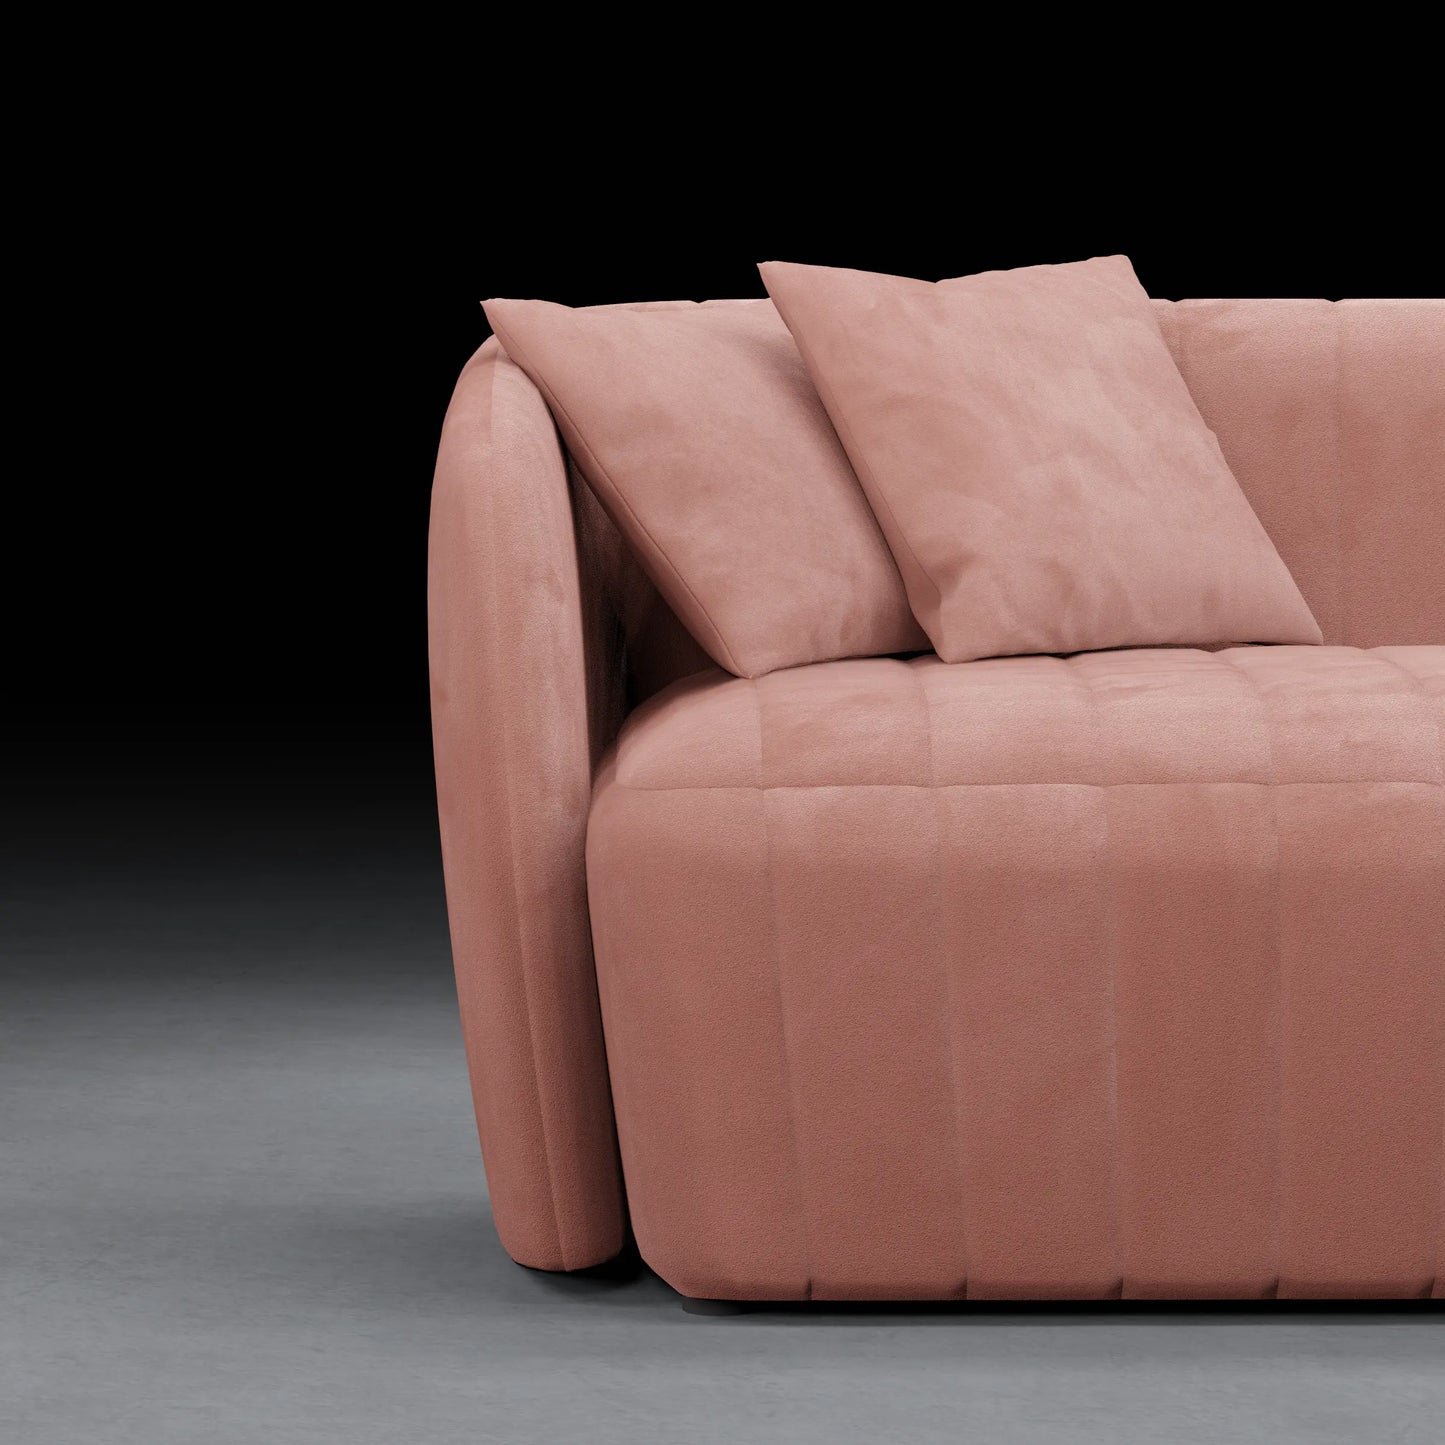 DAFFODIL - 2 Seater Tuxedo Couch In Velvet Finish | Pink Color